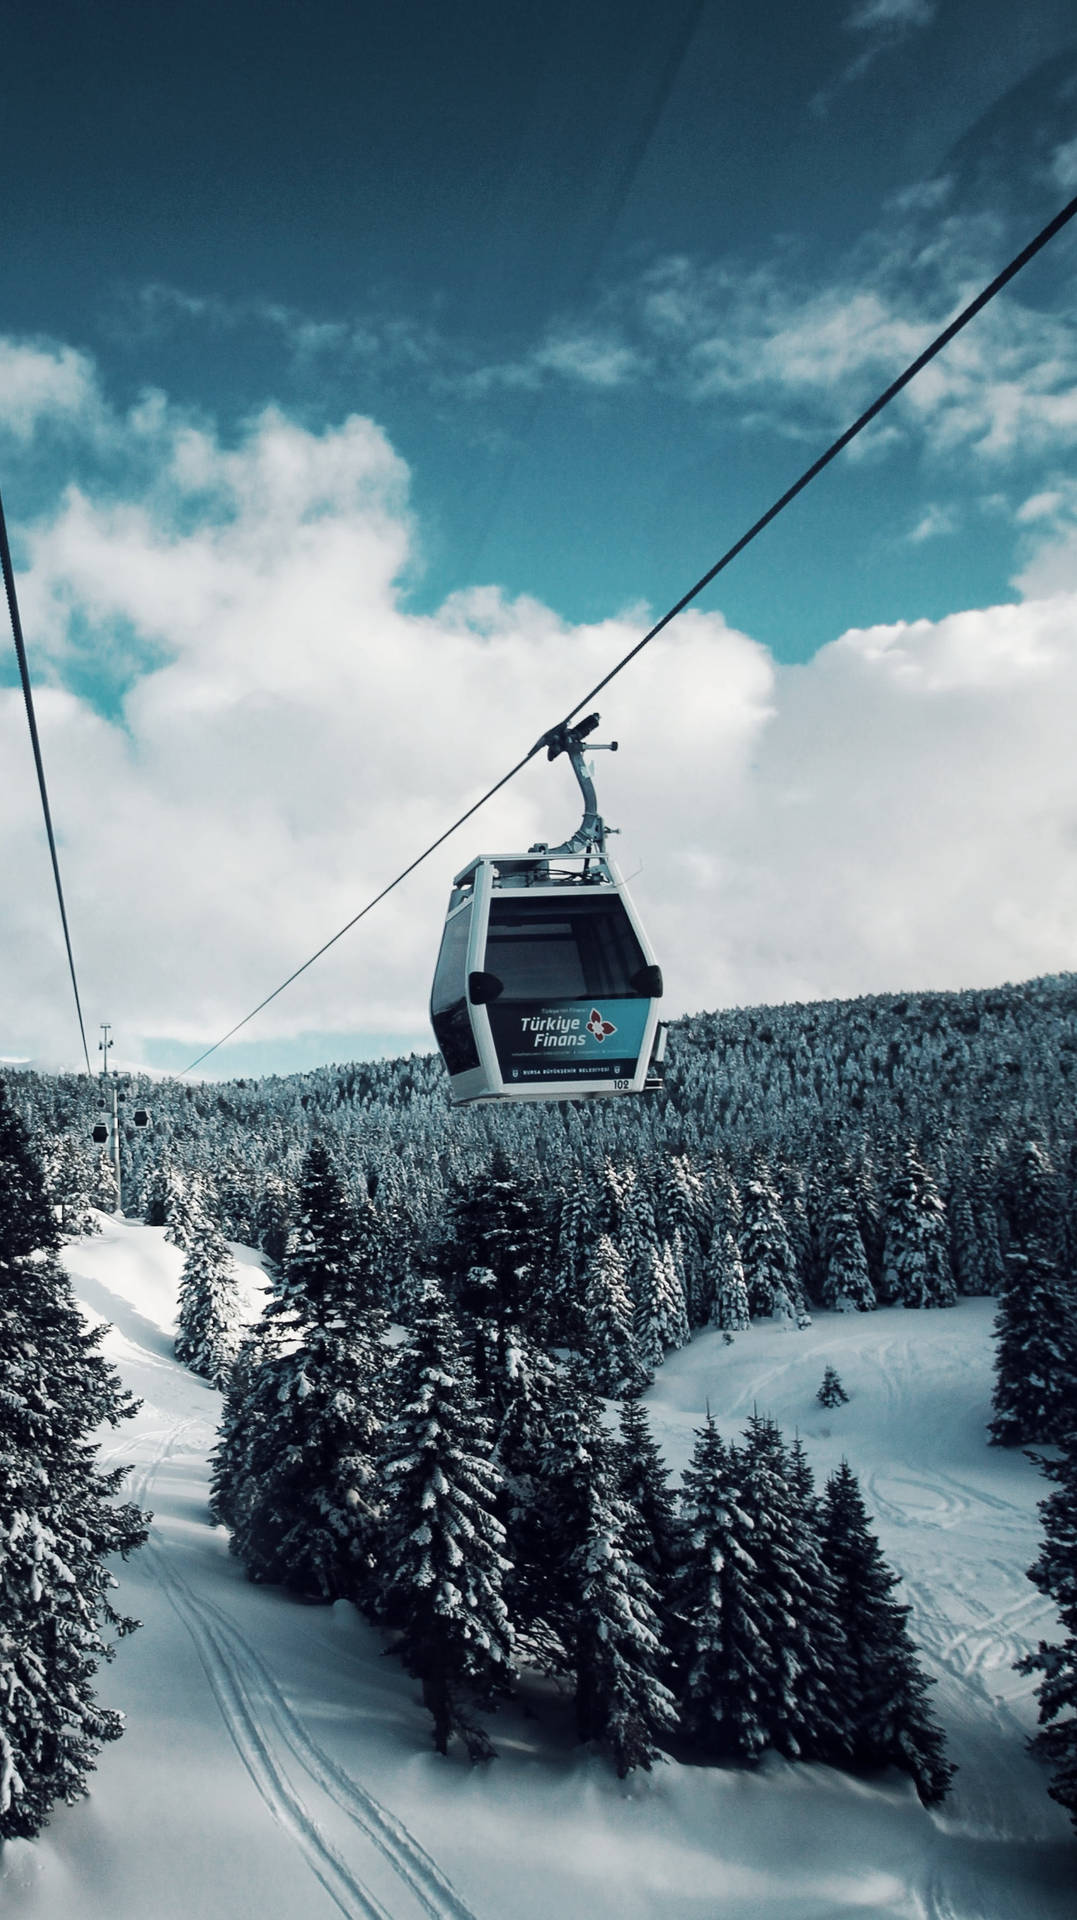 Winter Phone Turkey Cable Car